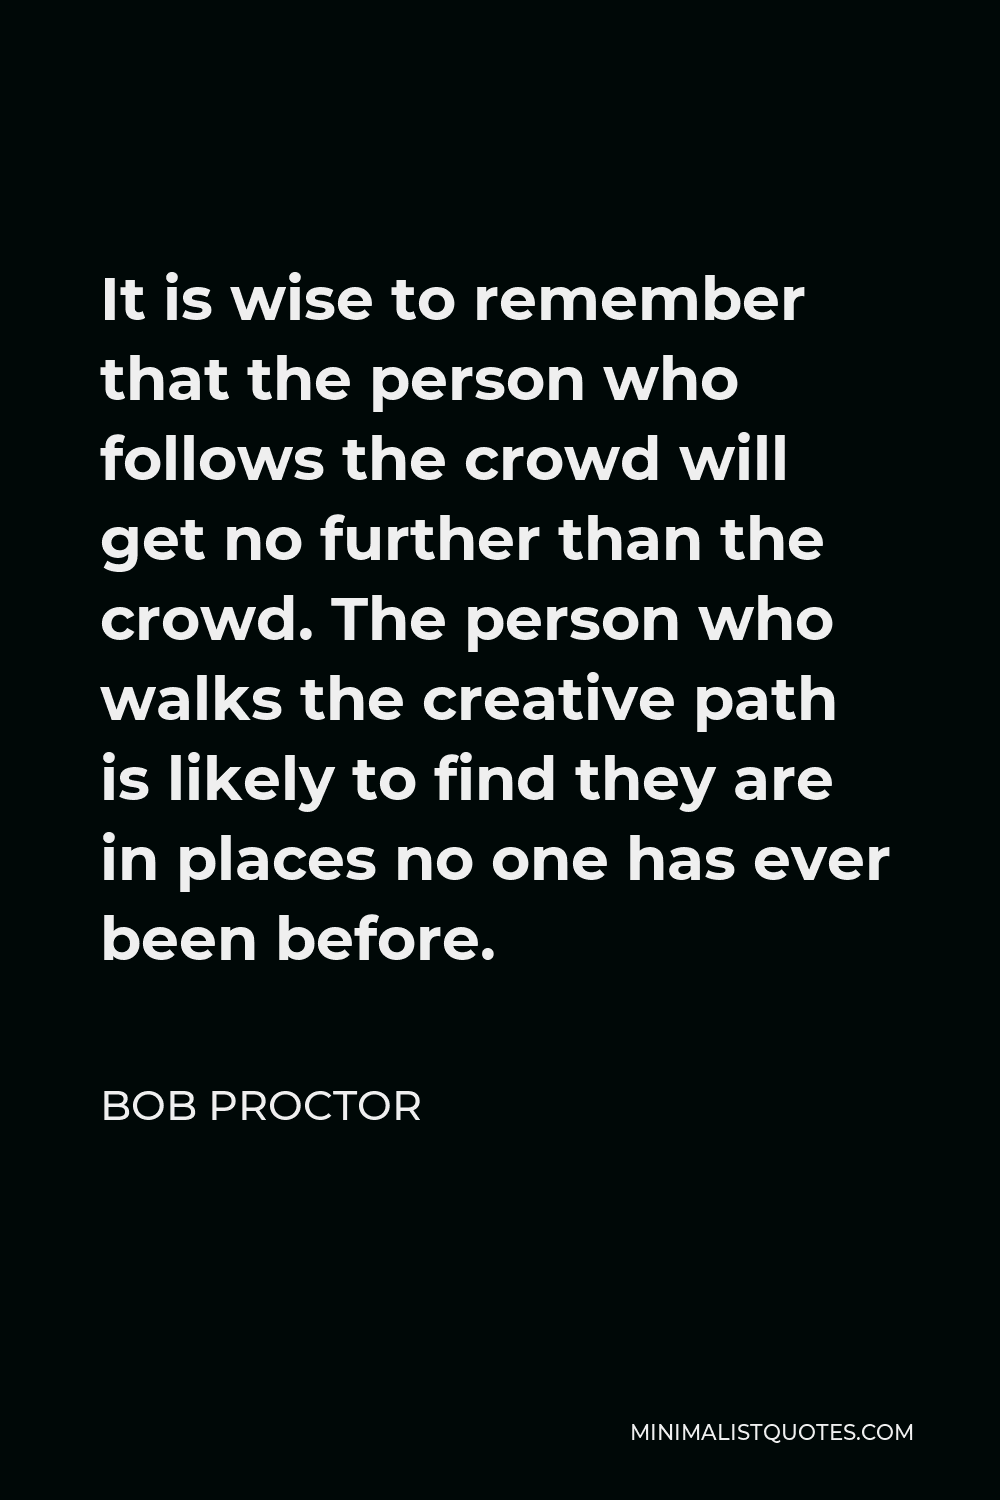 Bob Proctor Quote - It is wise to remember that the person who follows the crowd will get no further than the crowd. The person who walks the creative path is likely to find they are in places no one has ever been before.